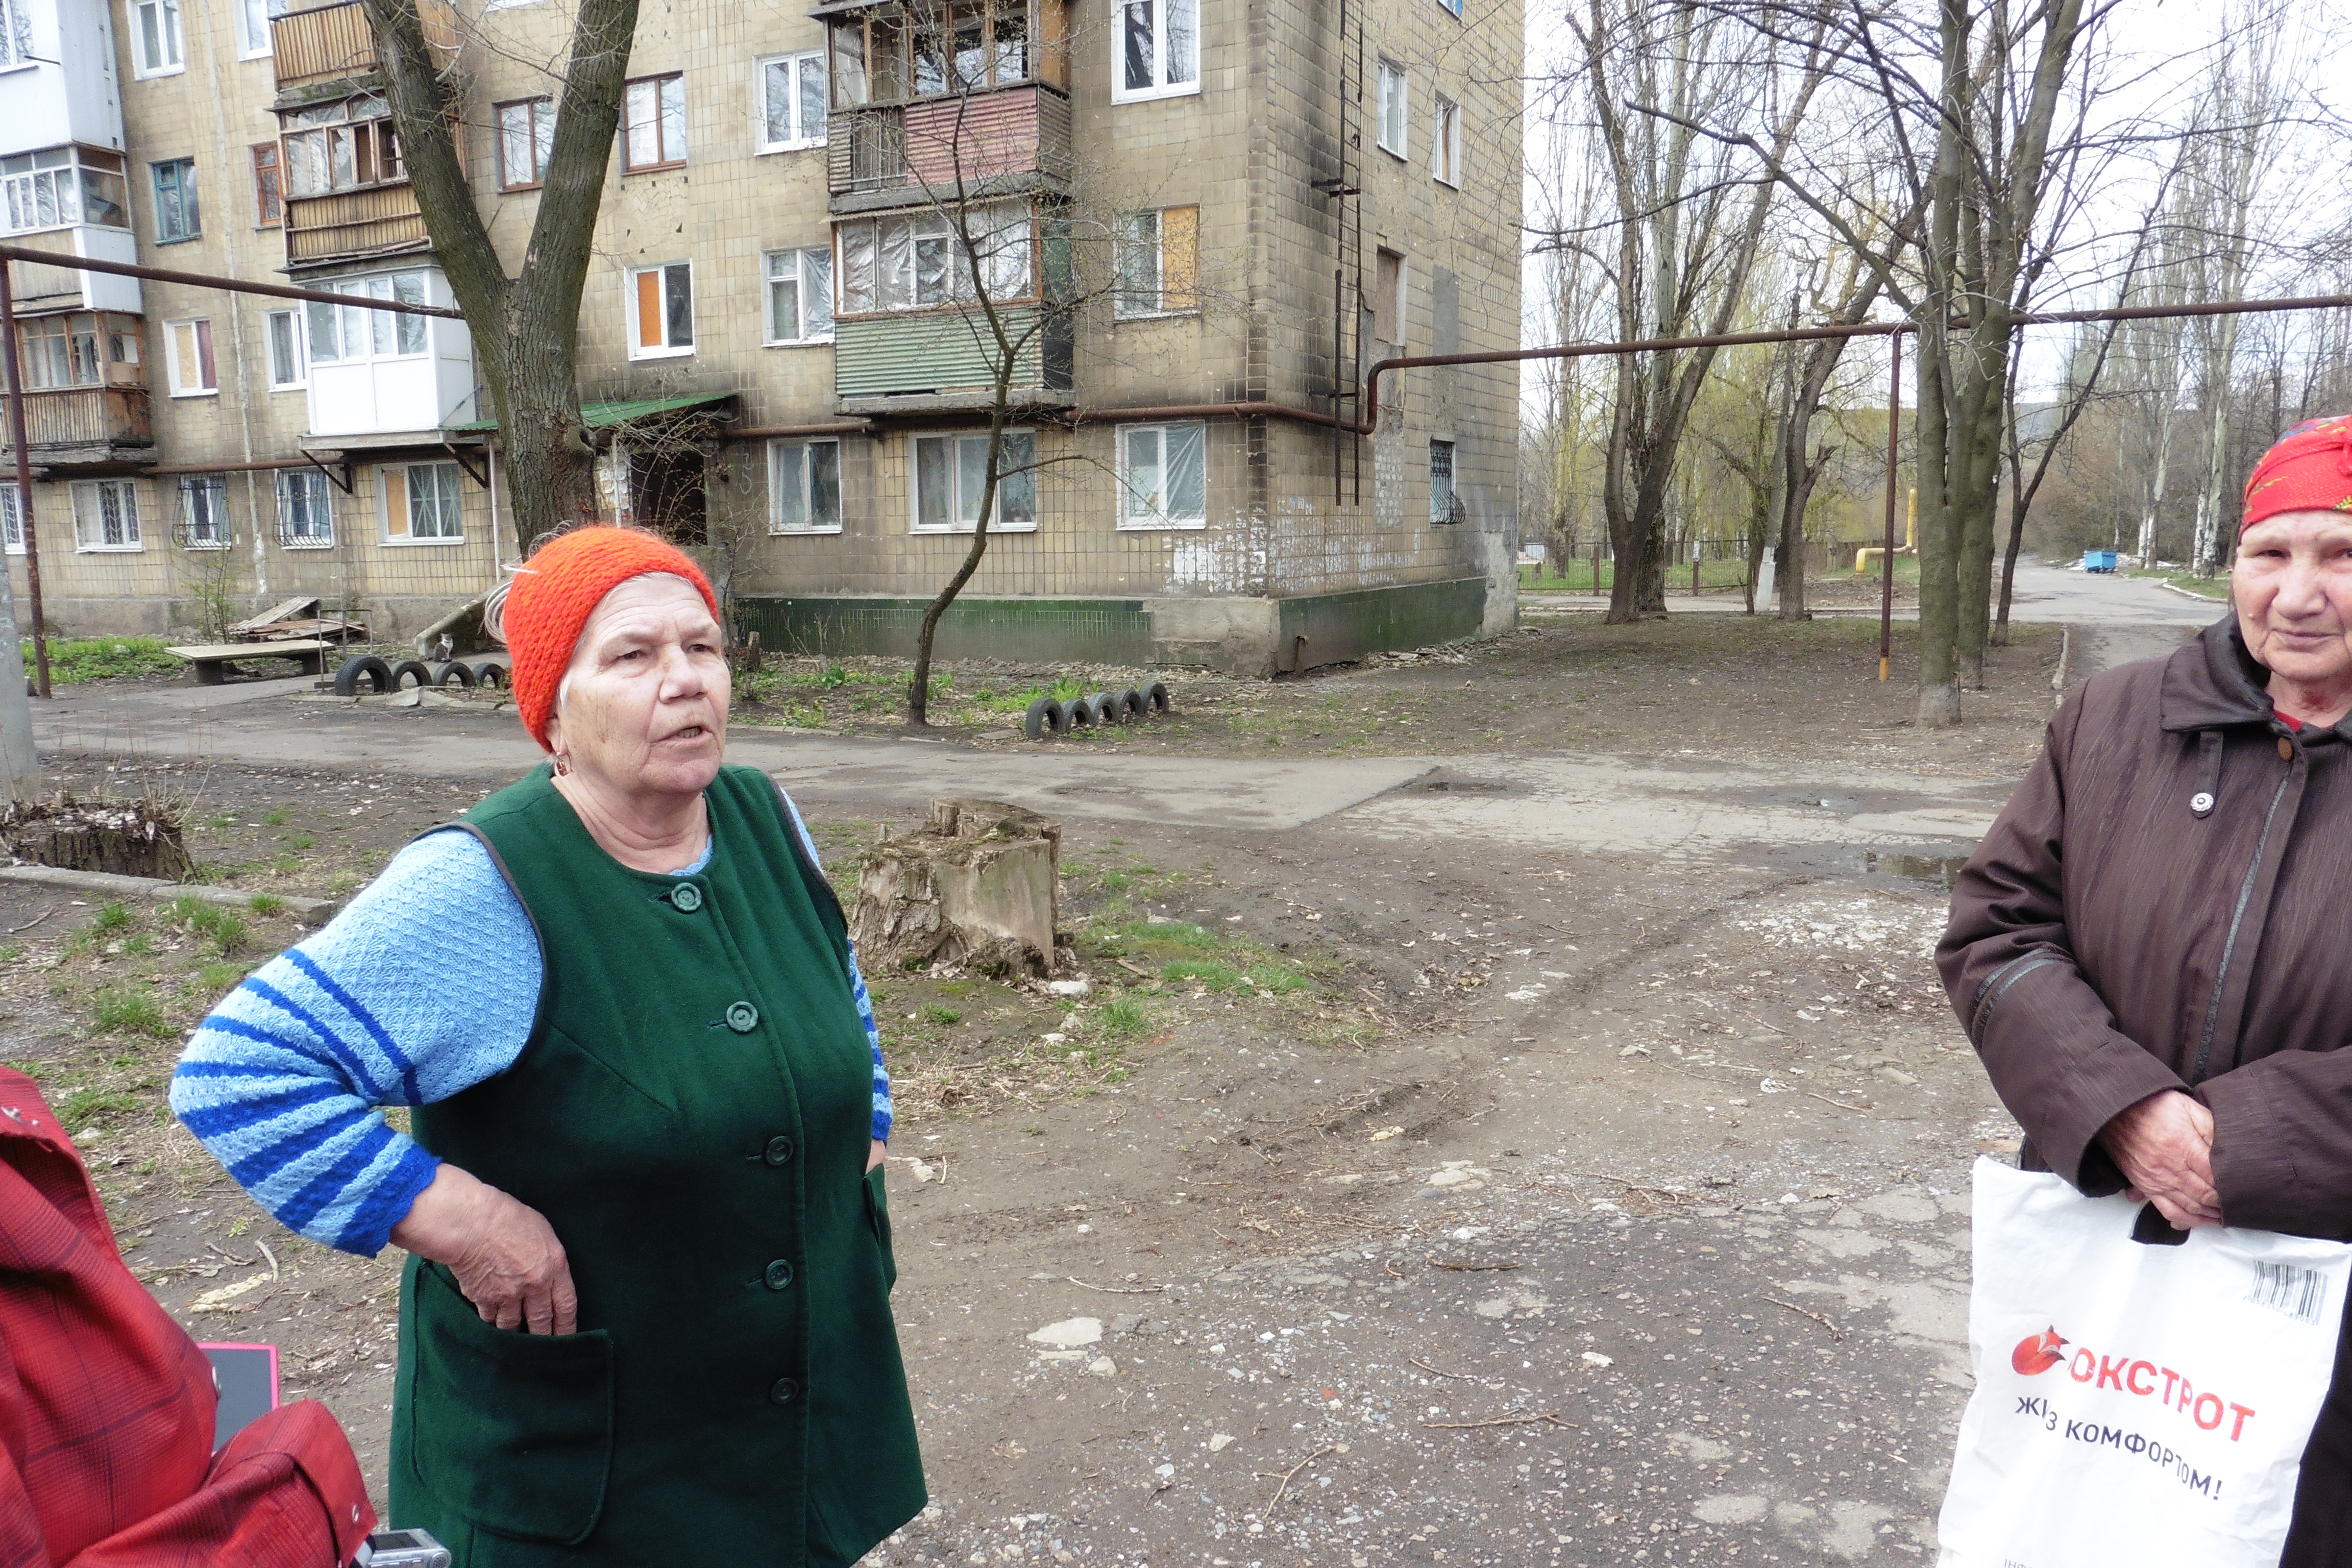 residents_of_october_district_of_donetsk_city_hard_hit_by_ukraine_army_shelling_speak_to_visiting_media_group_on_april_16_2015_photo_roger_annis_0